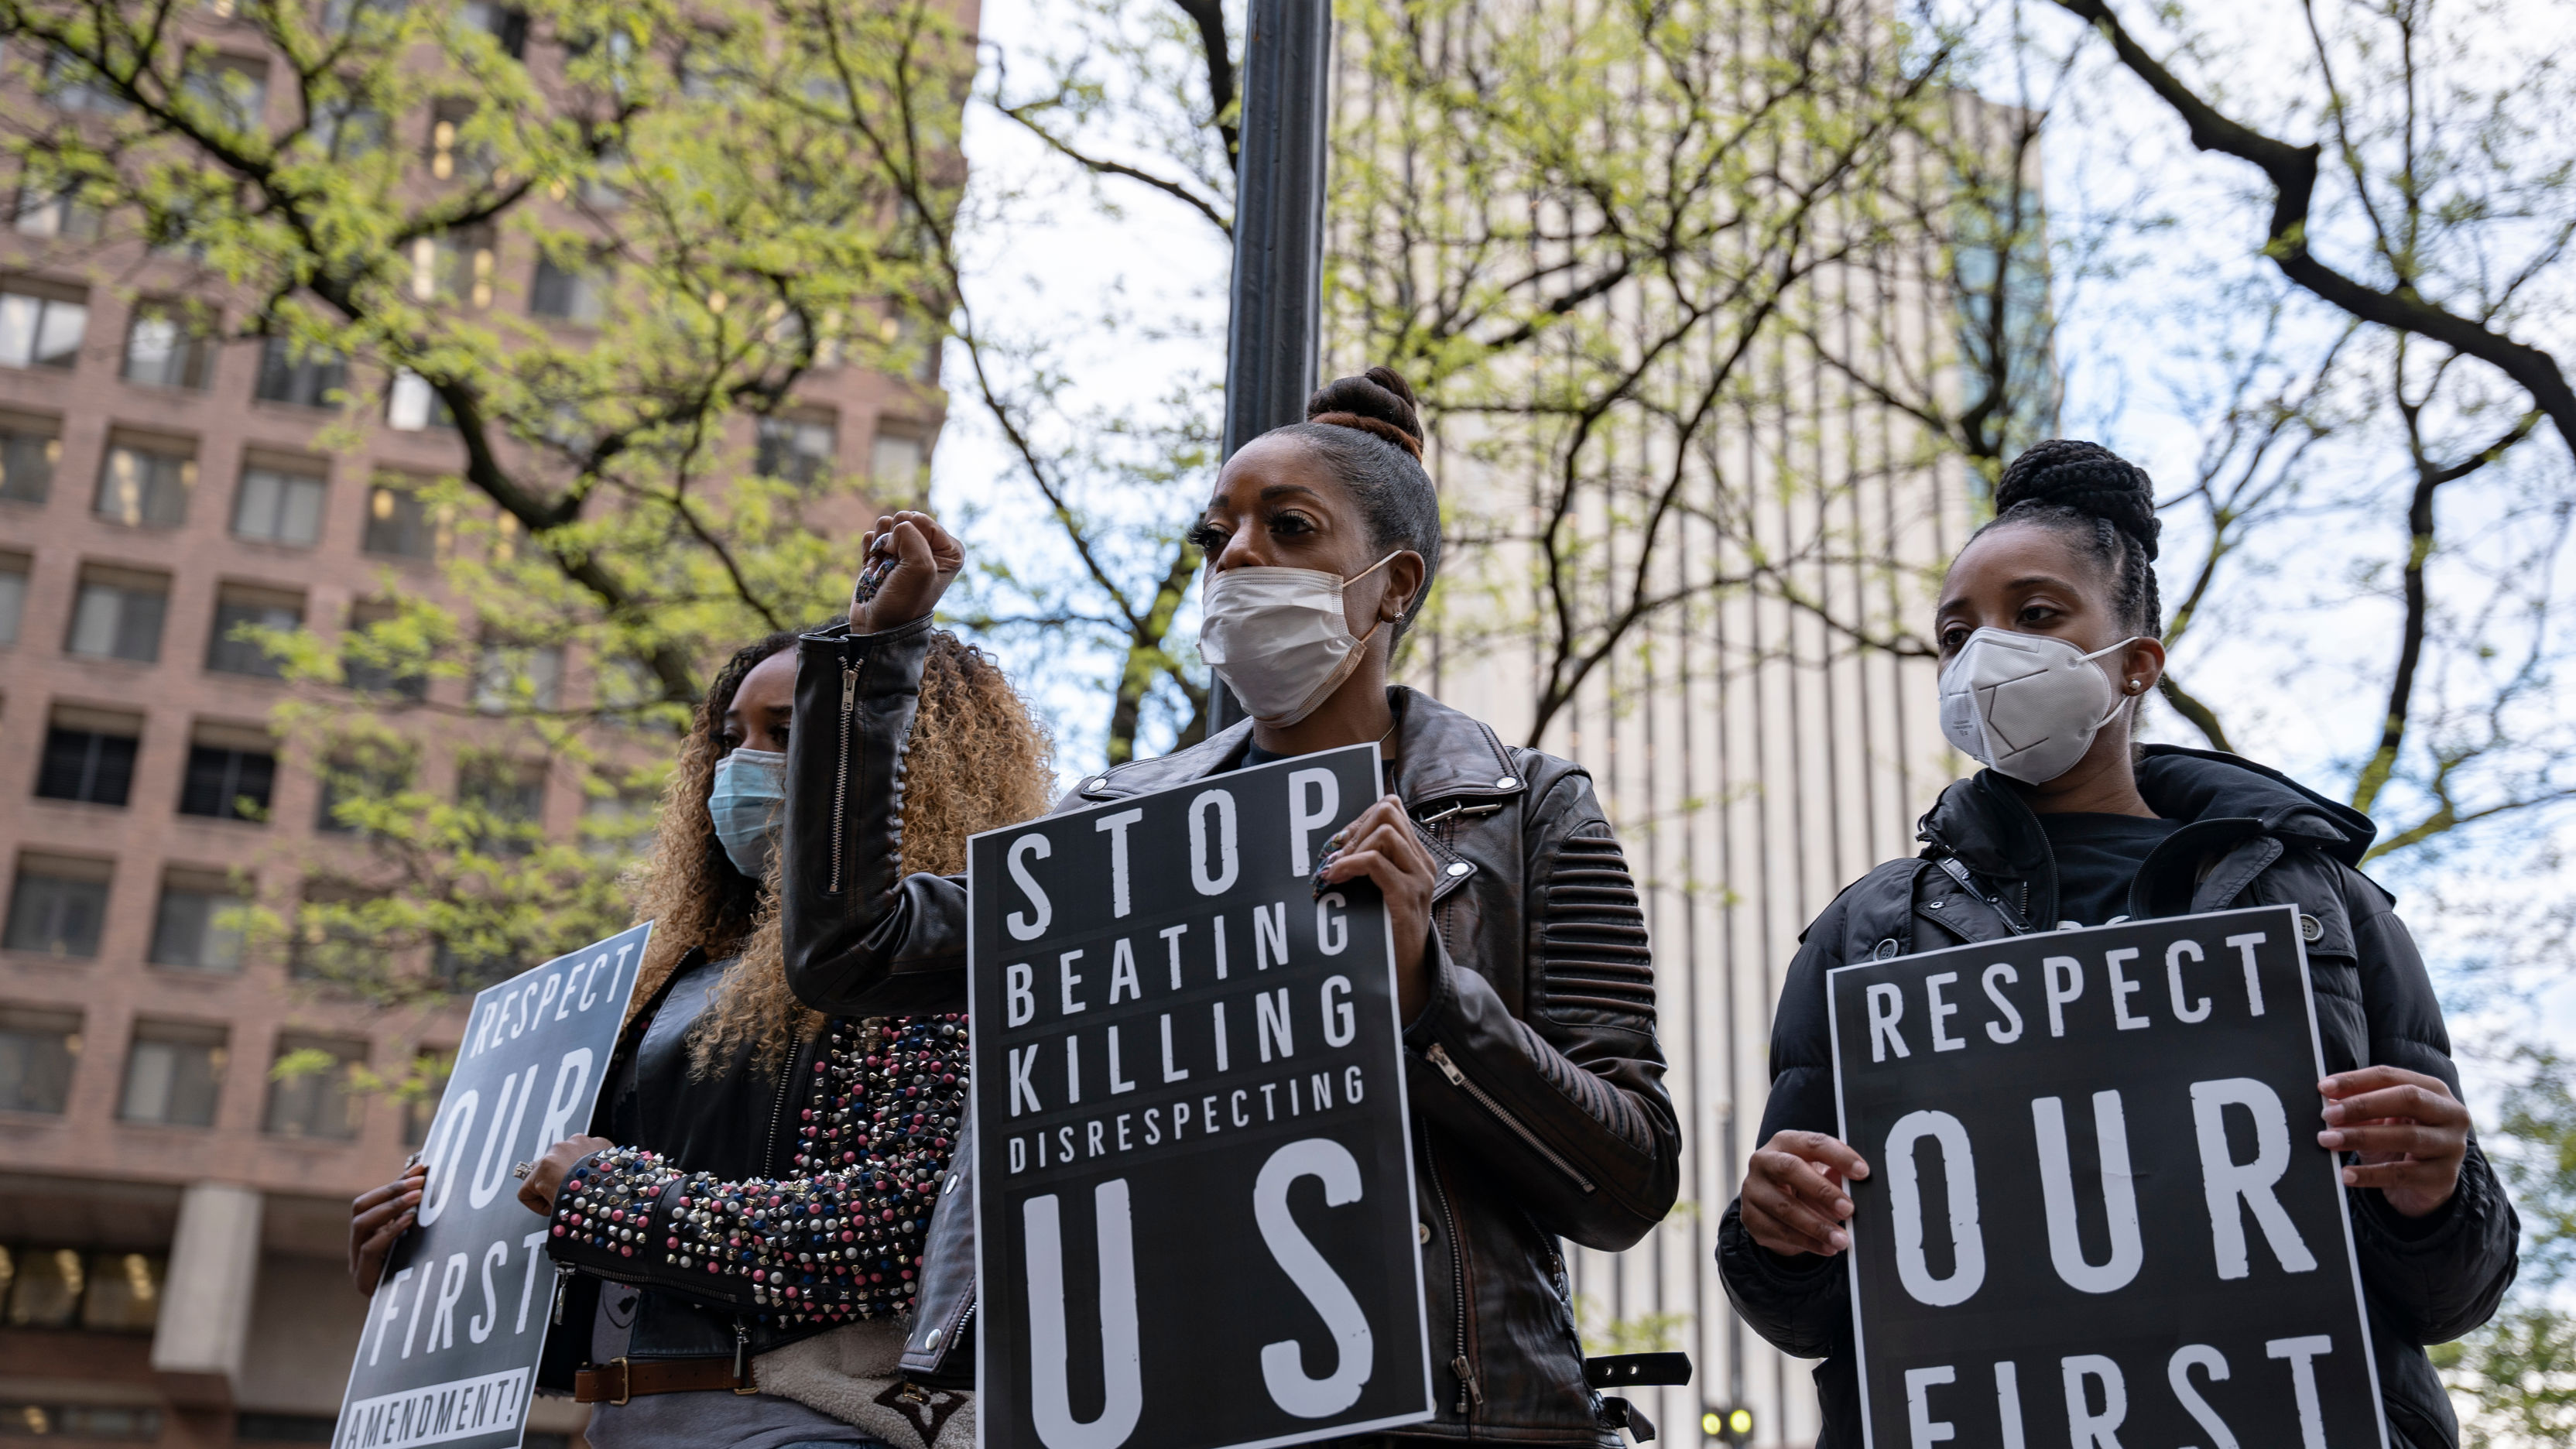 Protestors in Manhattan, New York hold up signs advocating for an end to police brutality against Black Americans.